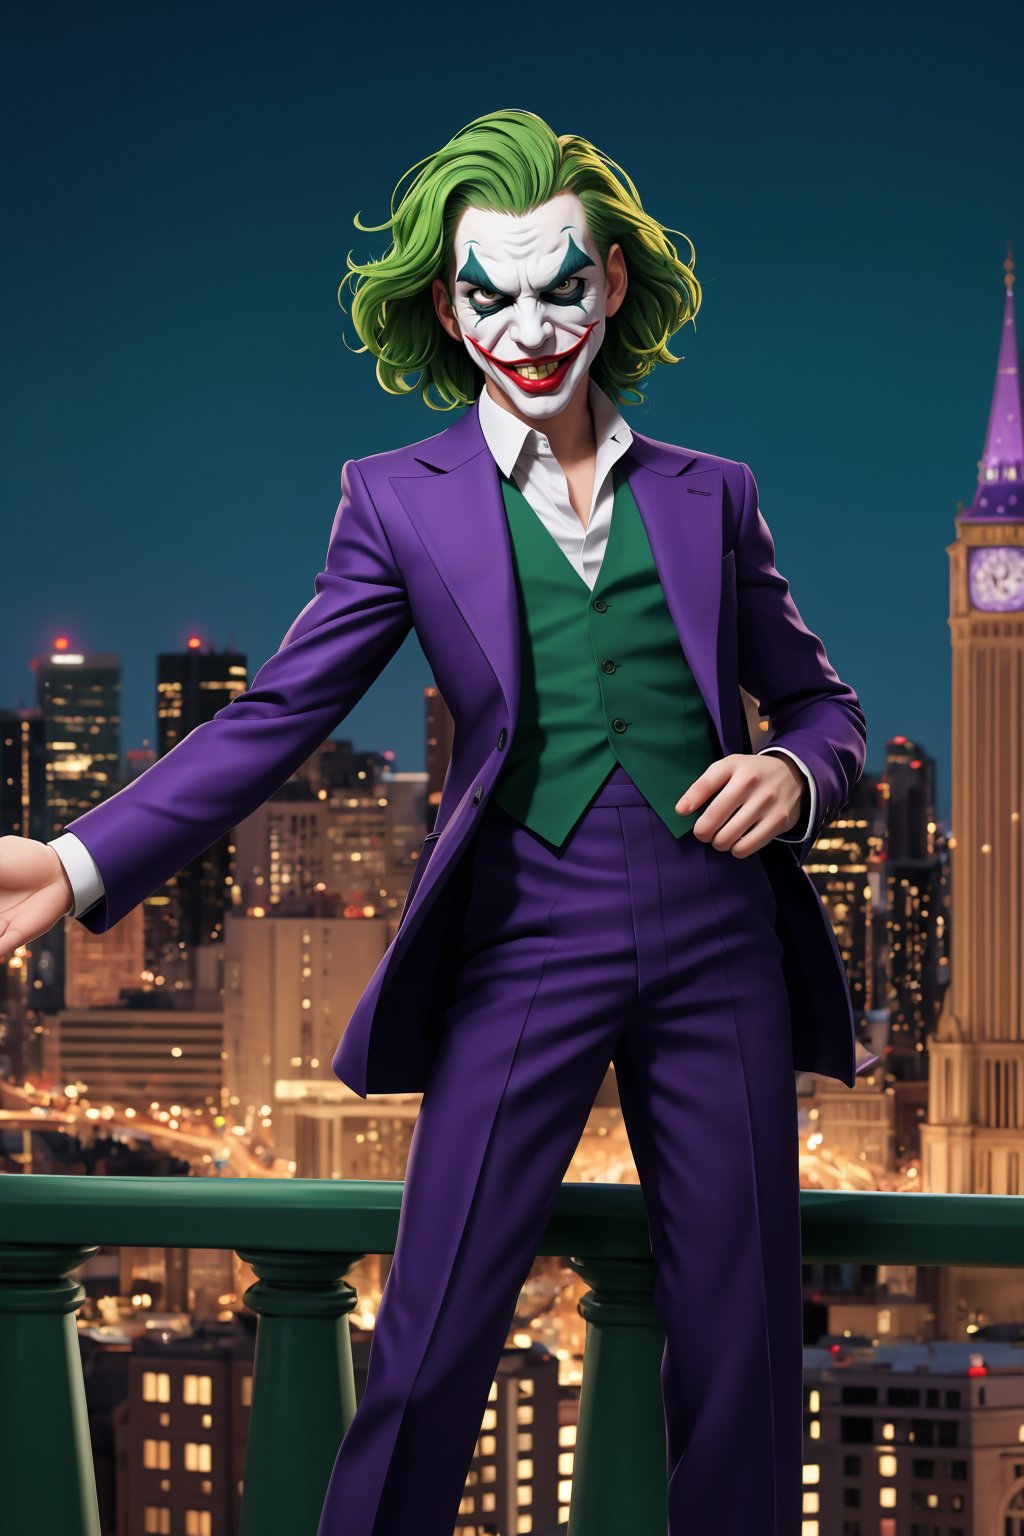 Best Quality, Masterpiece, Ultra High Resolution, Detailed Background, joker, crazy pose; face, green hair, city background, 4k resolution